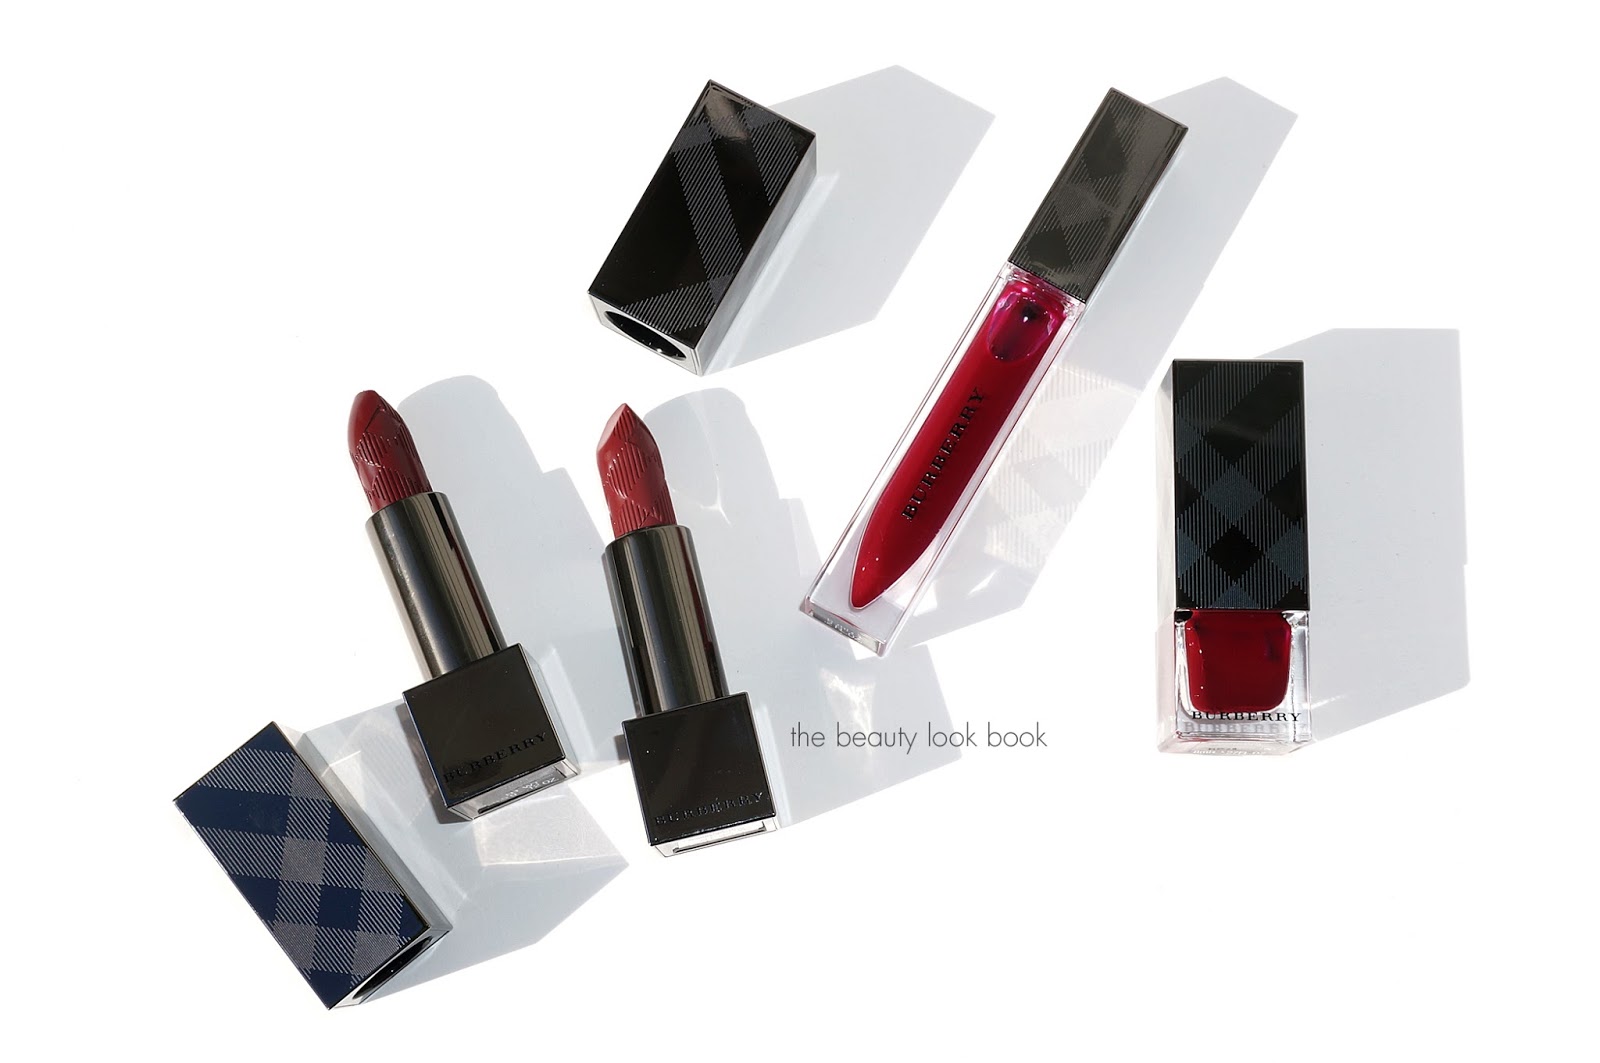 Lipstick Archives - Page 23 of 46 - The Beauty Look Book